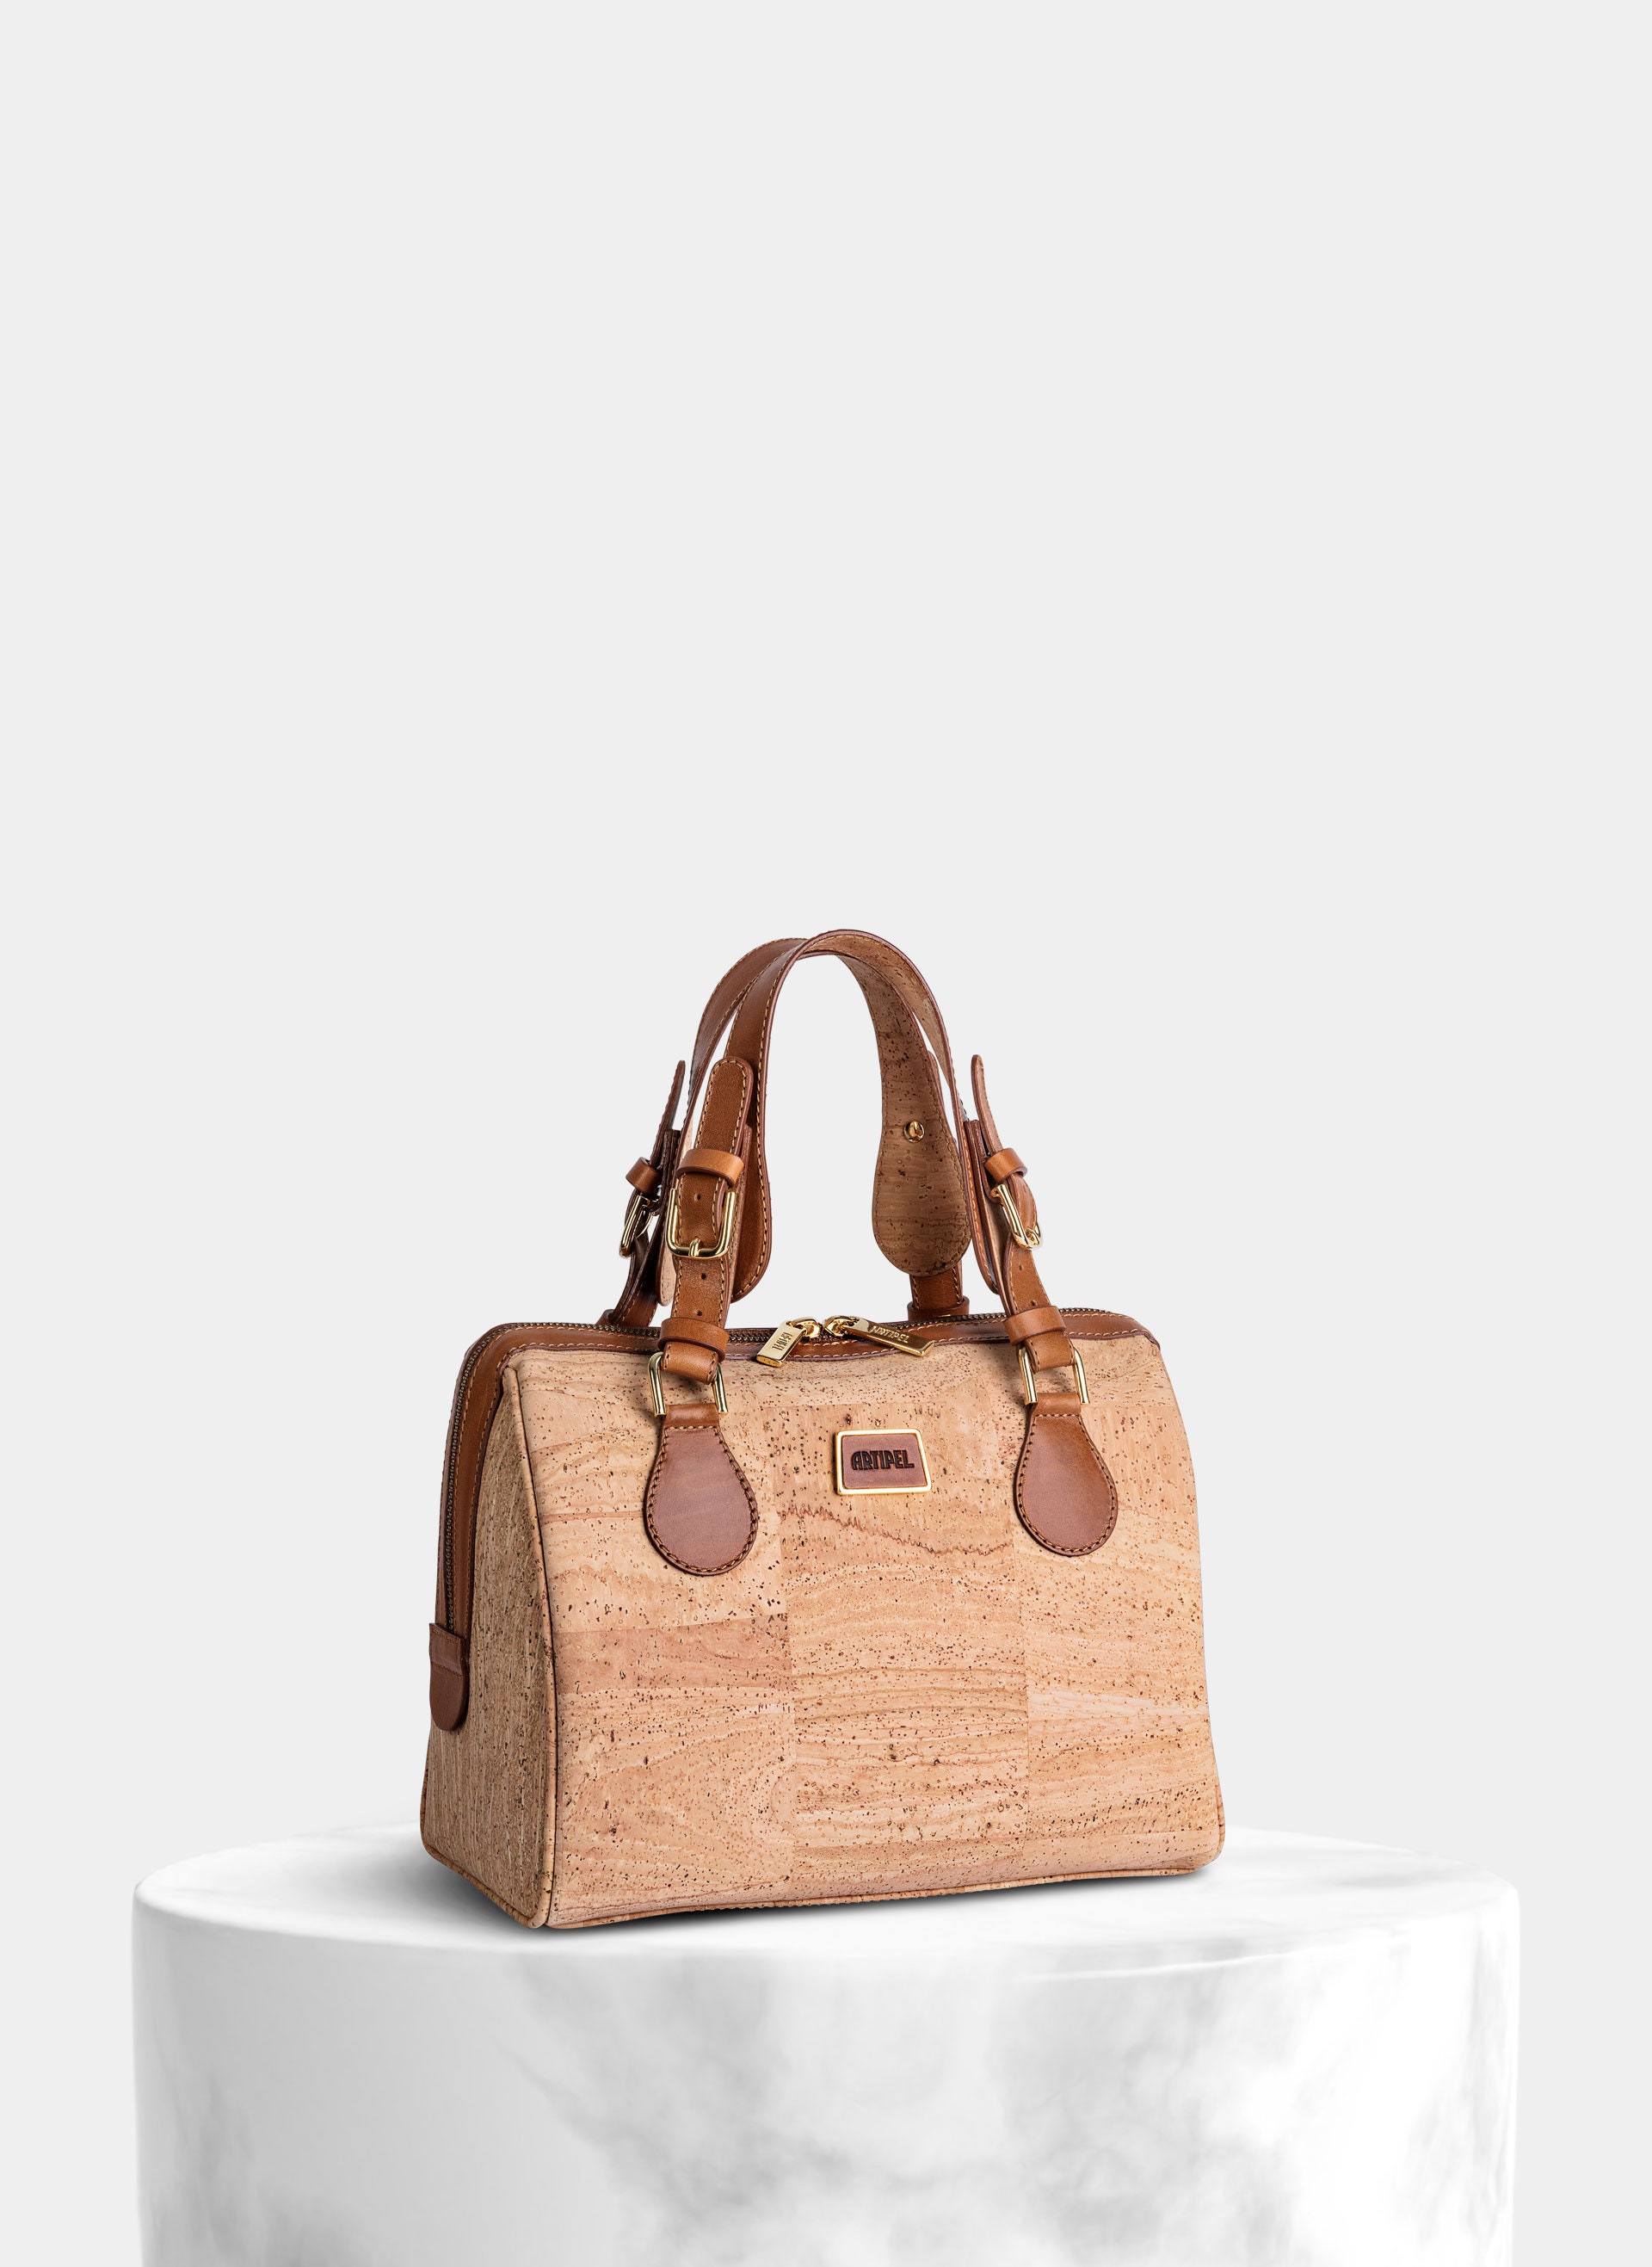 Cork Woman Handbag Boston Style Made in Portugal With Cork Leather ...